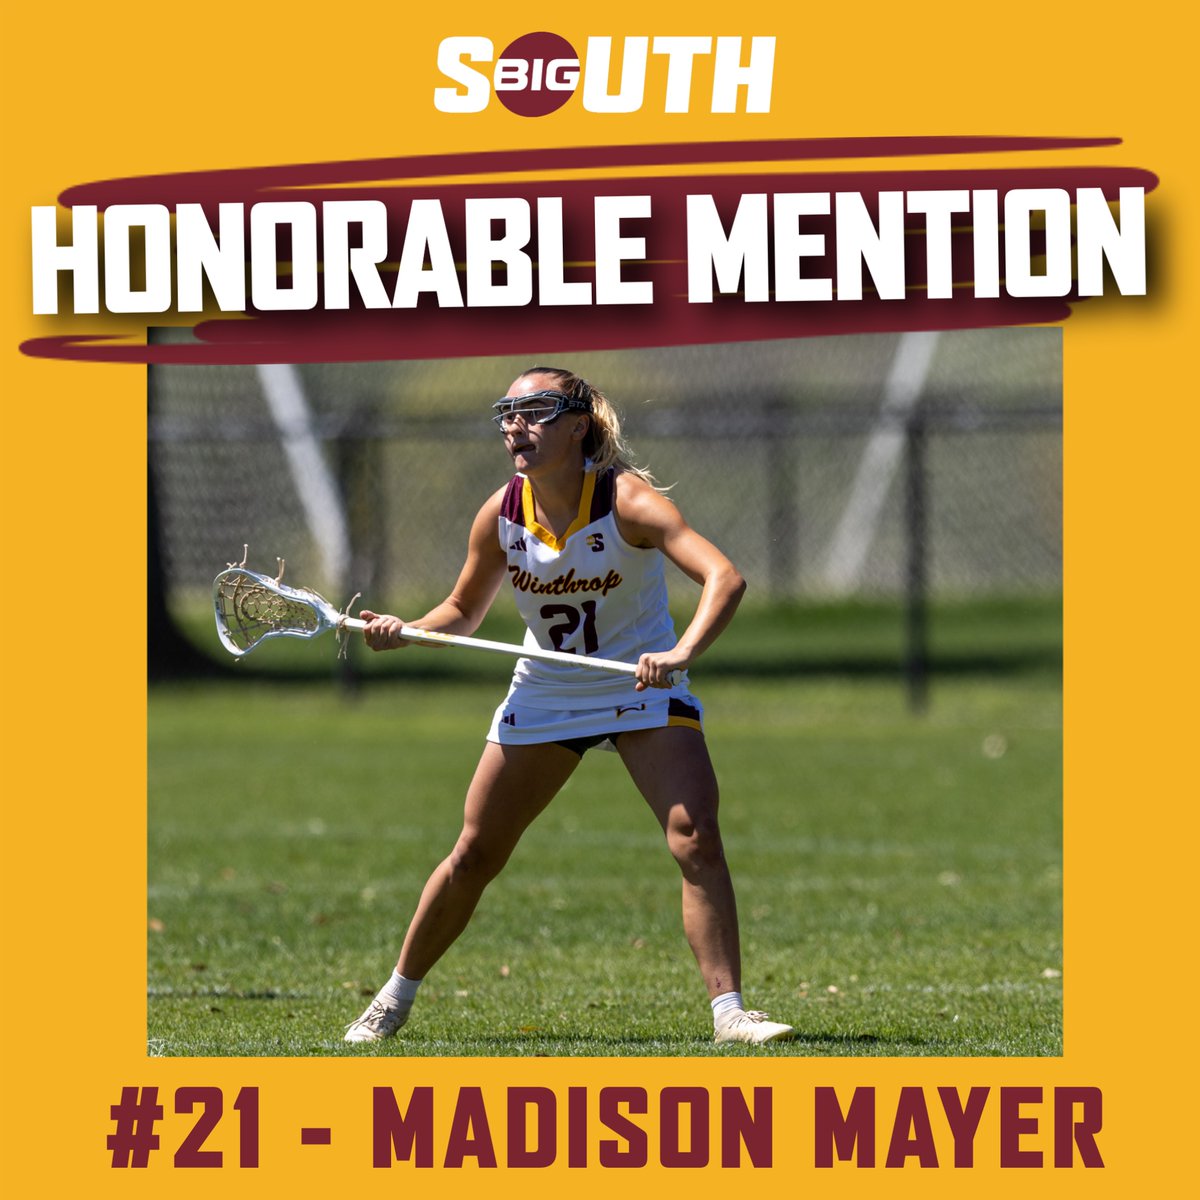 𝐎𝐔𝐑 𝐅𝐄𝐀𝐑𝐋𝐄𝐒𝐒 𝐅𝐑𝐄𝐒𝐇𝐌𝐀𝐍 💛🦅 . Congratulations to freshman midfielder, #21, Madison Mayer, on her Big South All-Conference Honorable Mention Award! . #GoEagles | #ROCKtheHILL